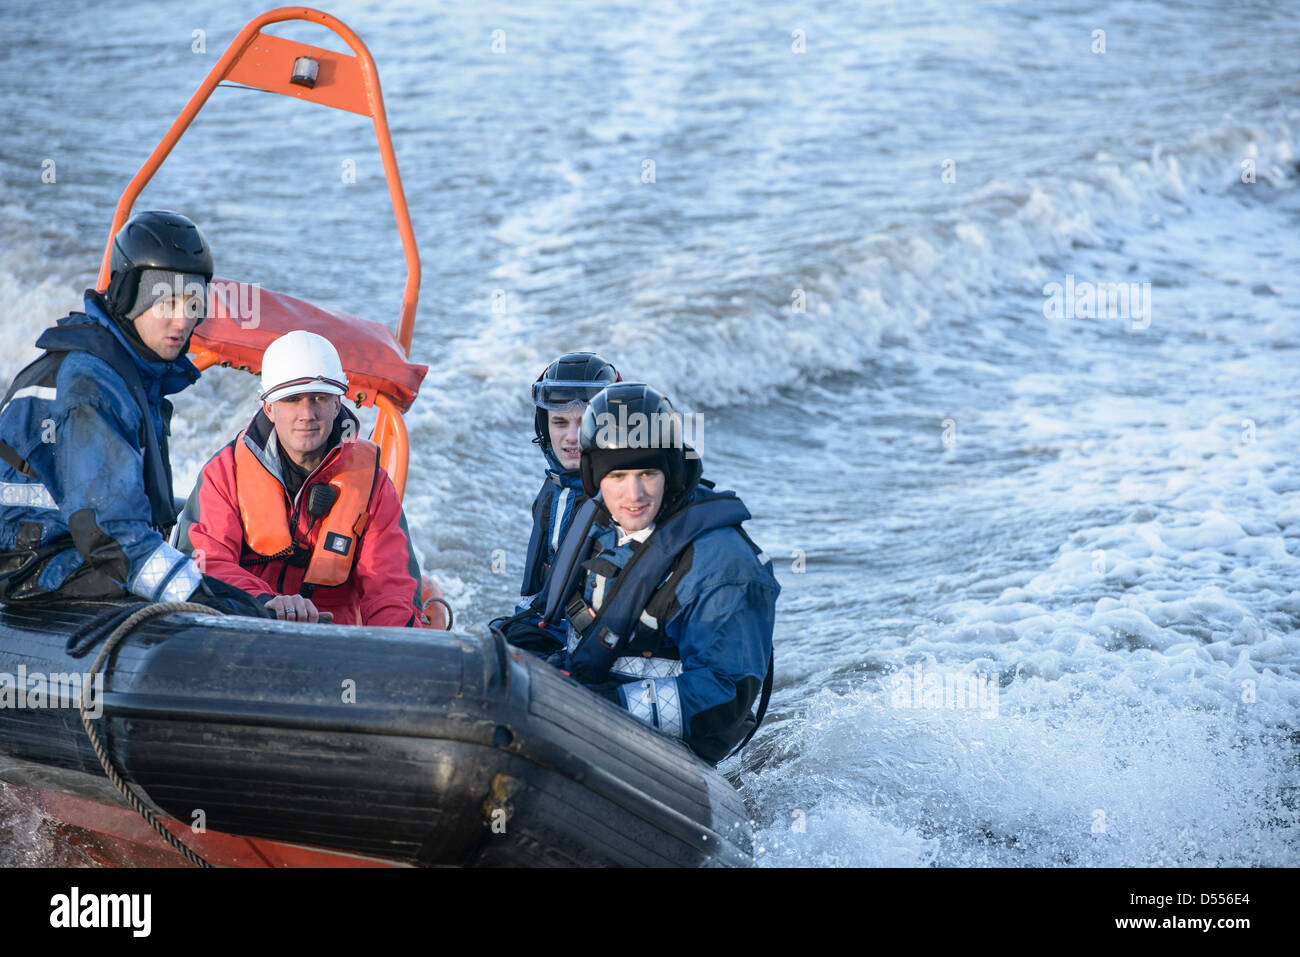 Rescue boat training in open water Stock Photo